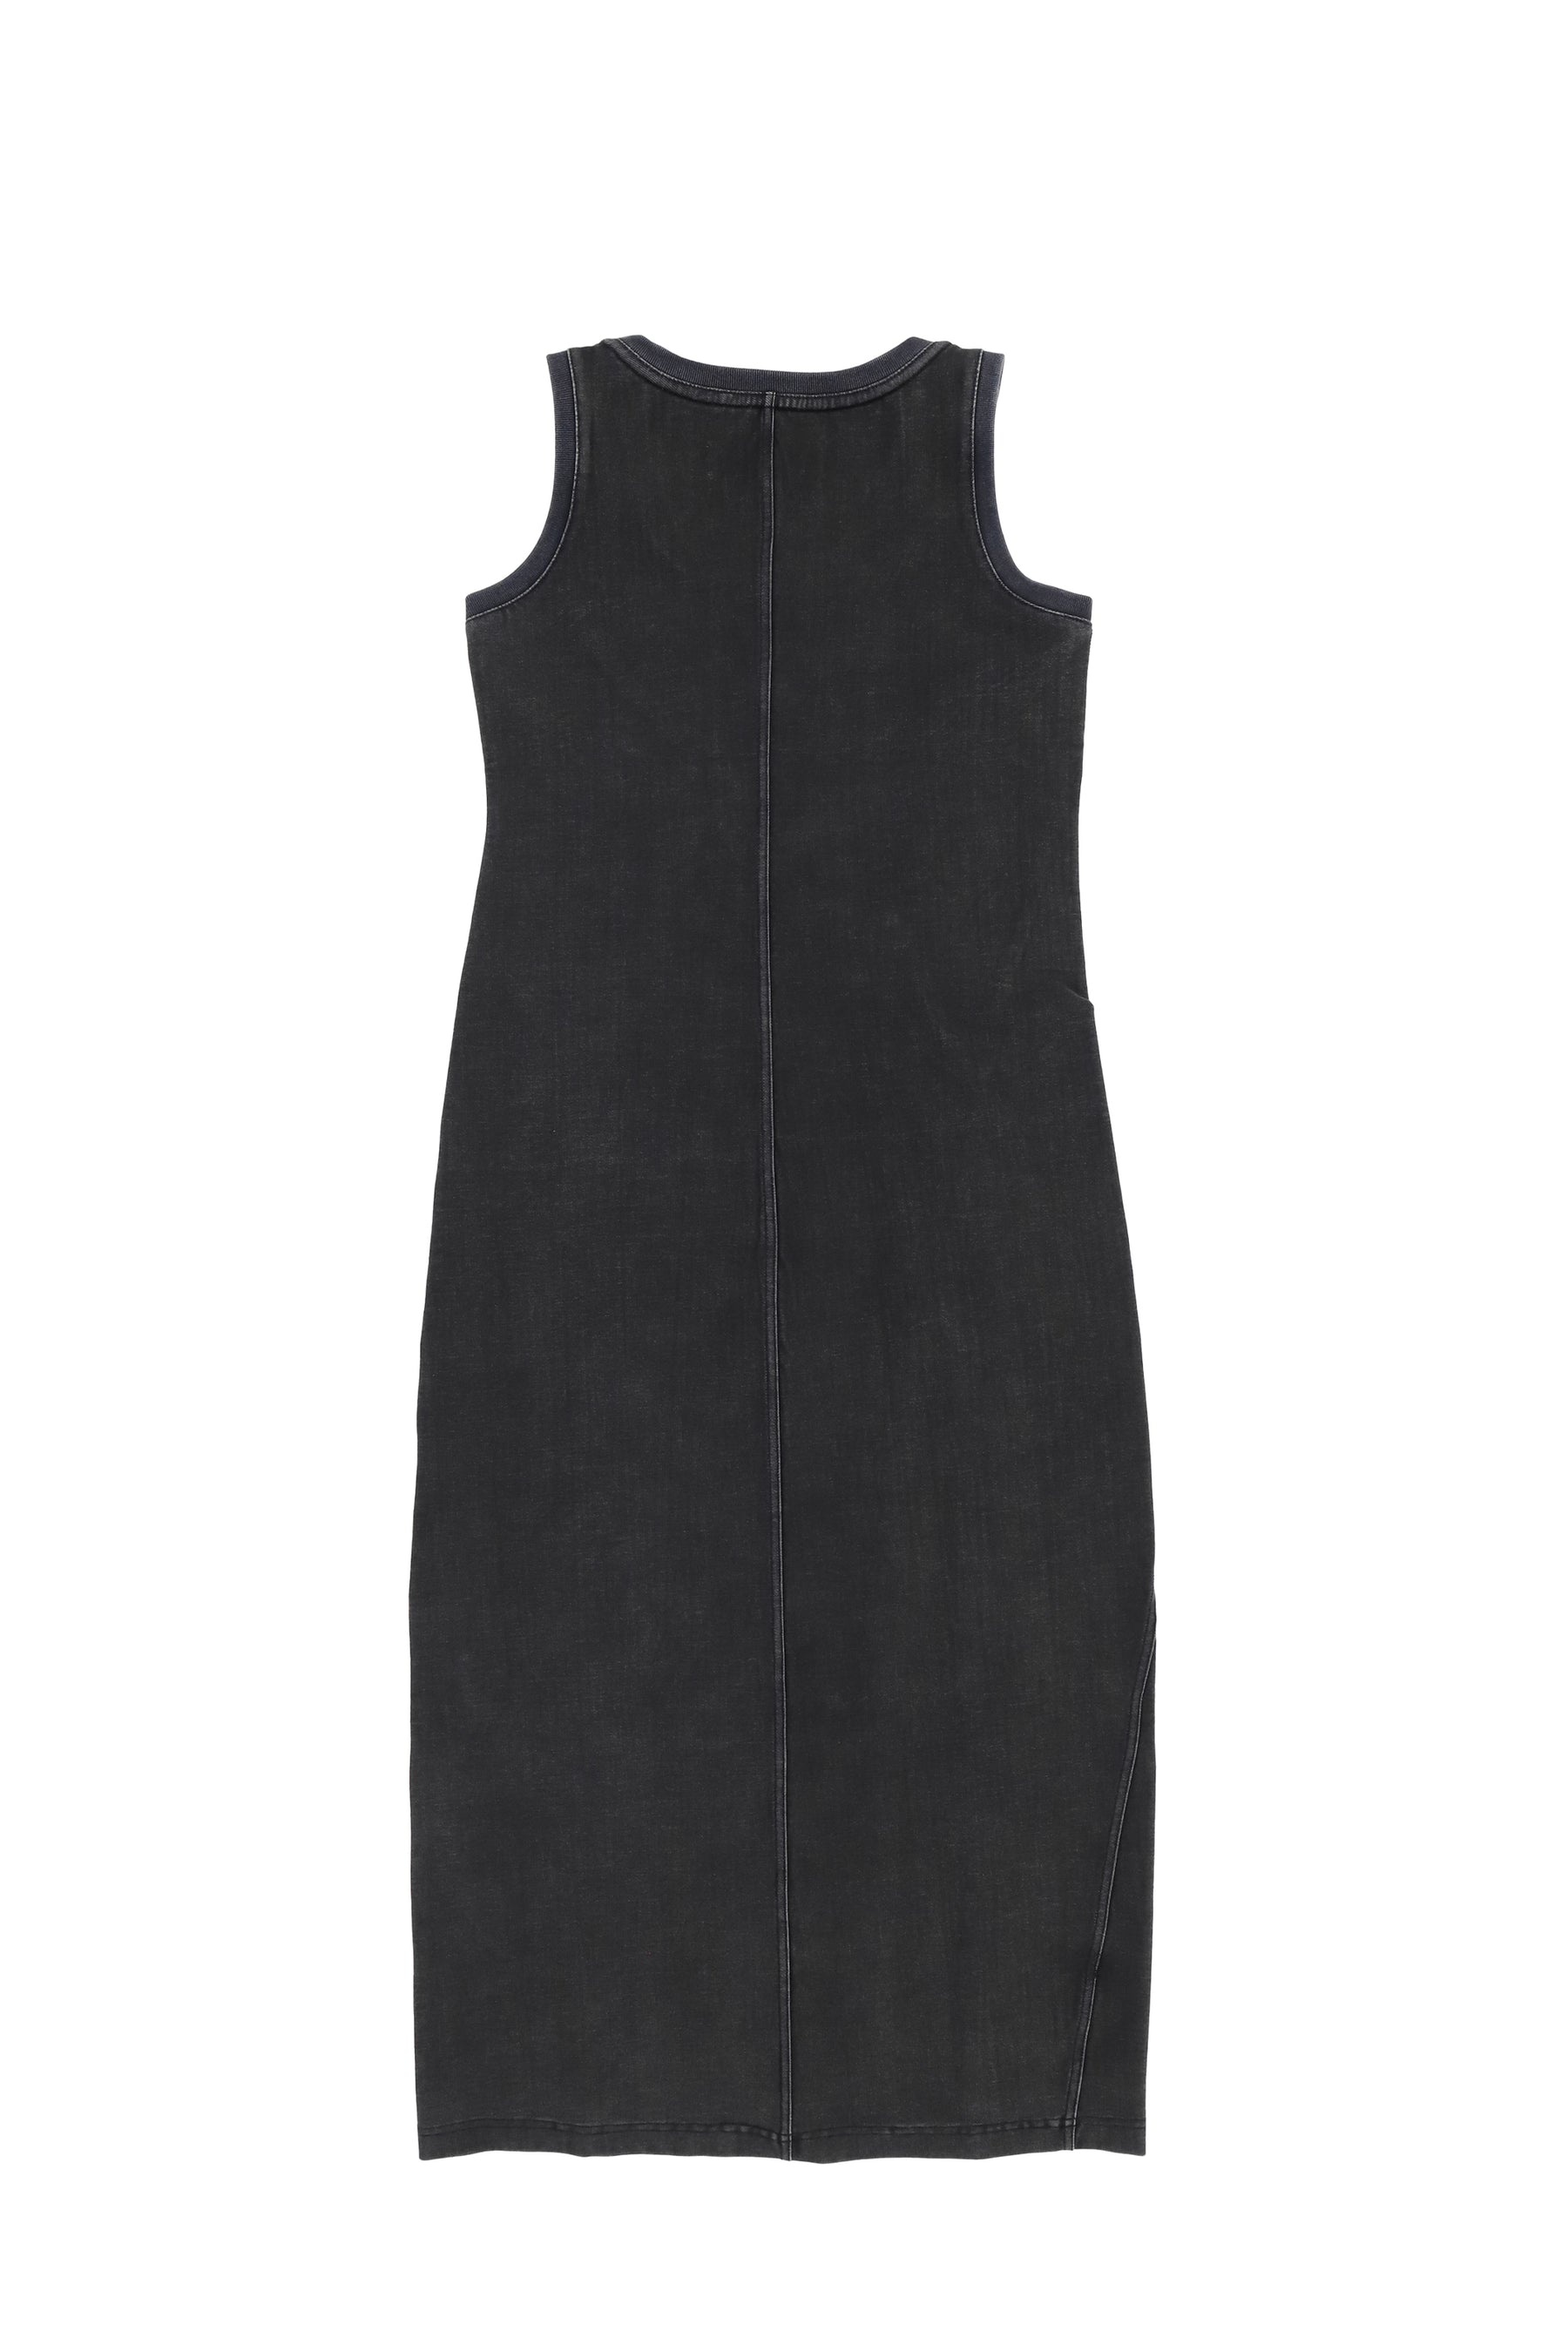 DECONSTRUCTED DRESS IN WASHED JERSEY / GRY - 2